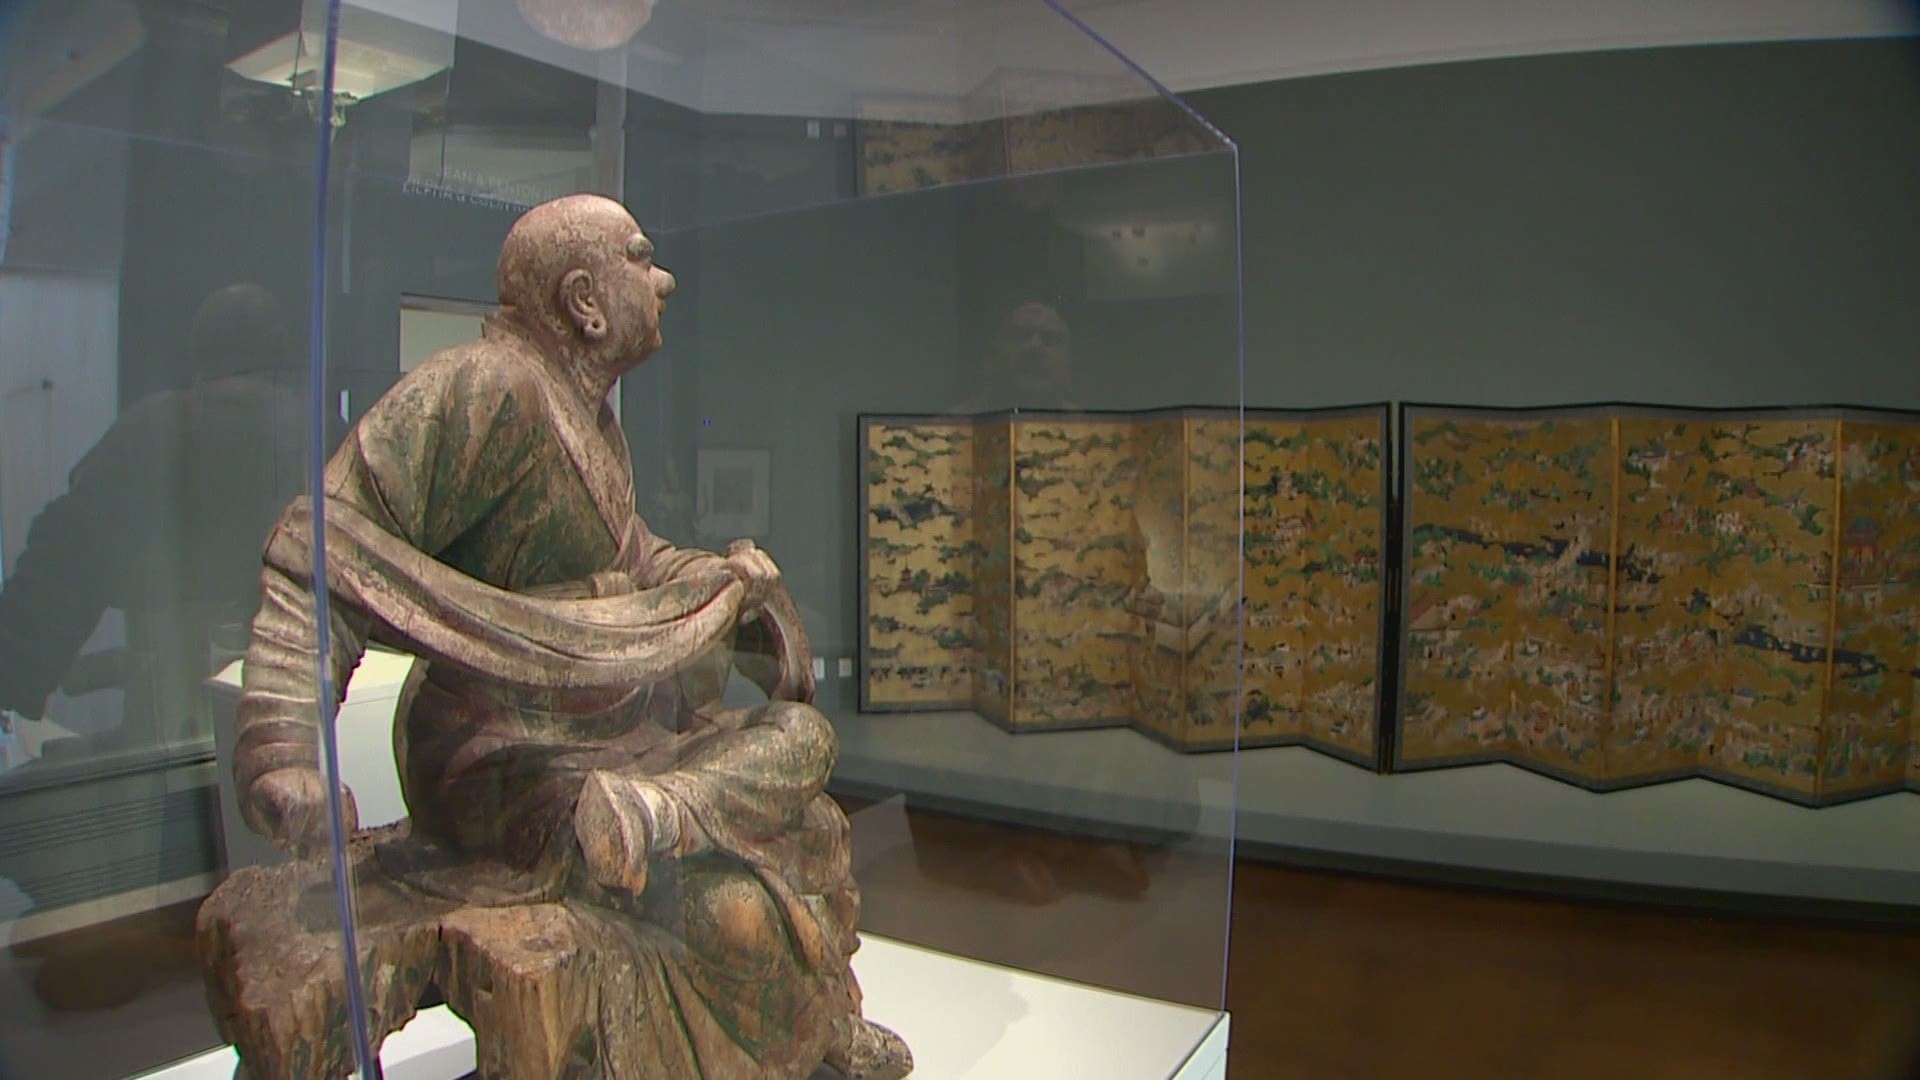 The Seattle Asian Art Museum will reopen its doors on May 28.